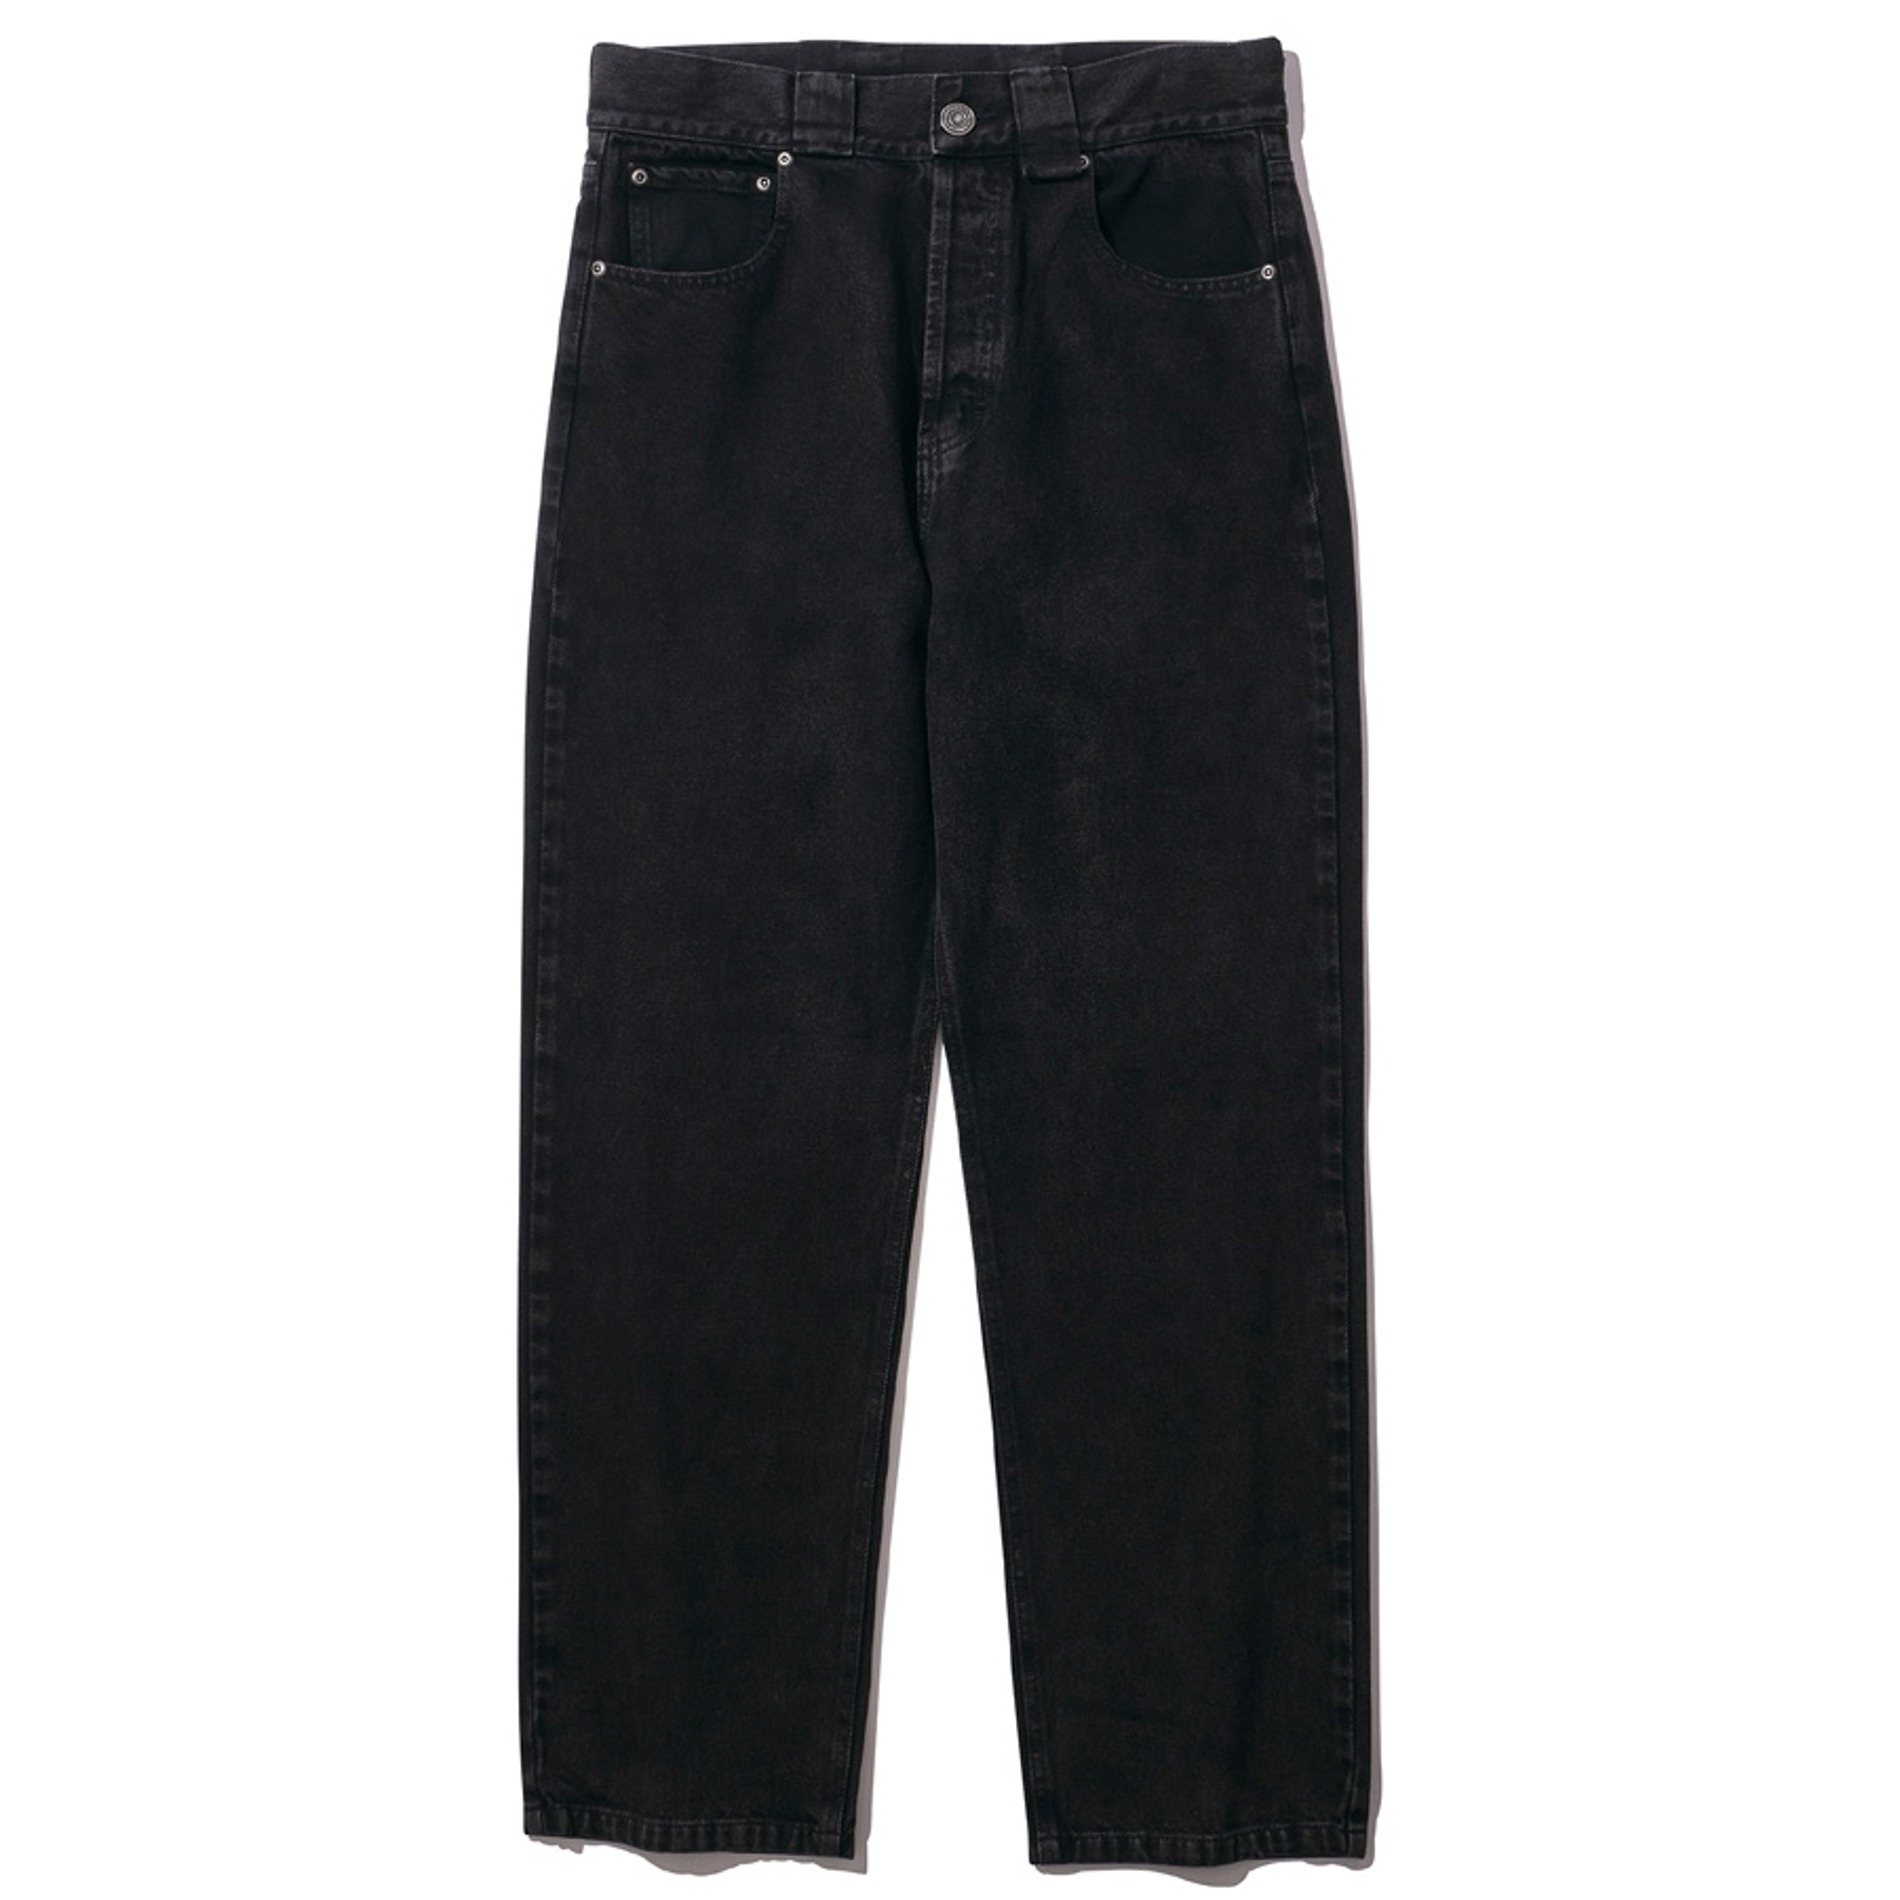 AW23 WILLY CHAVARRIA LOVE GARAGE JEAN WAHSED BLACK